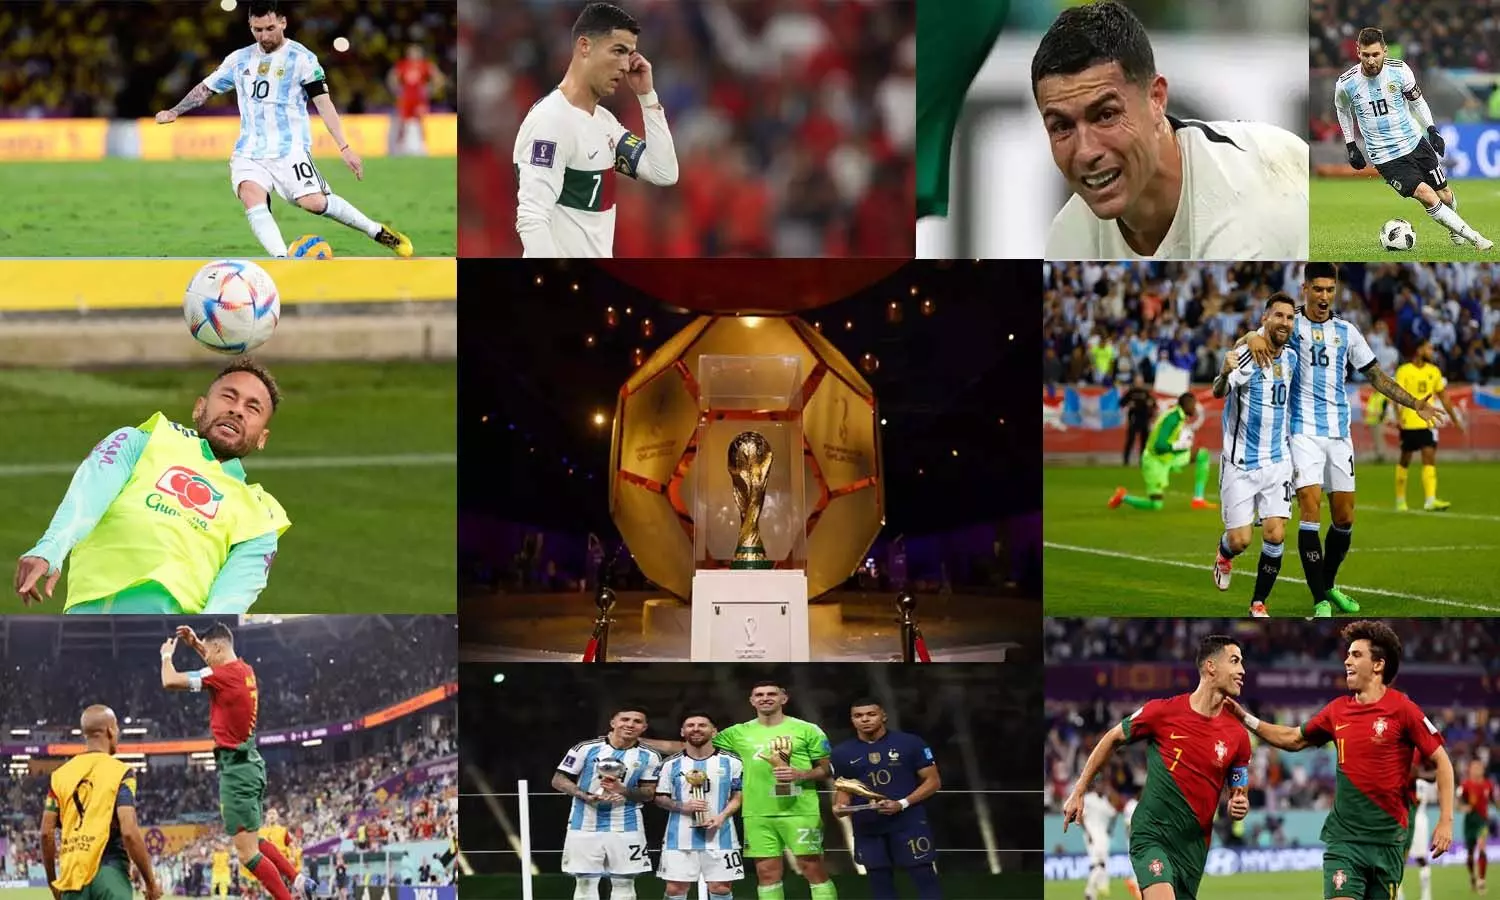 This FIFA World Cup 2022 tournament will be remembered a lot